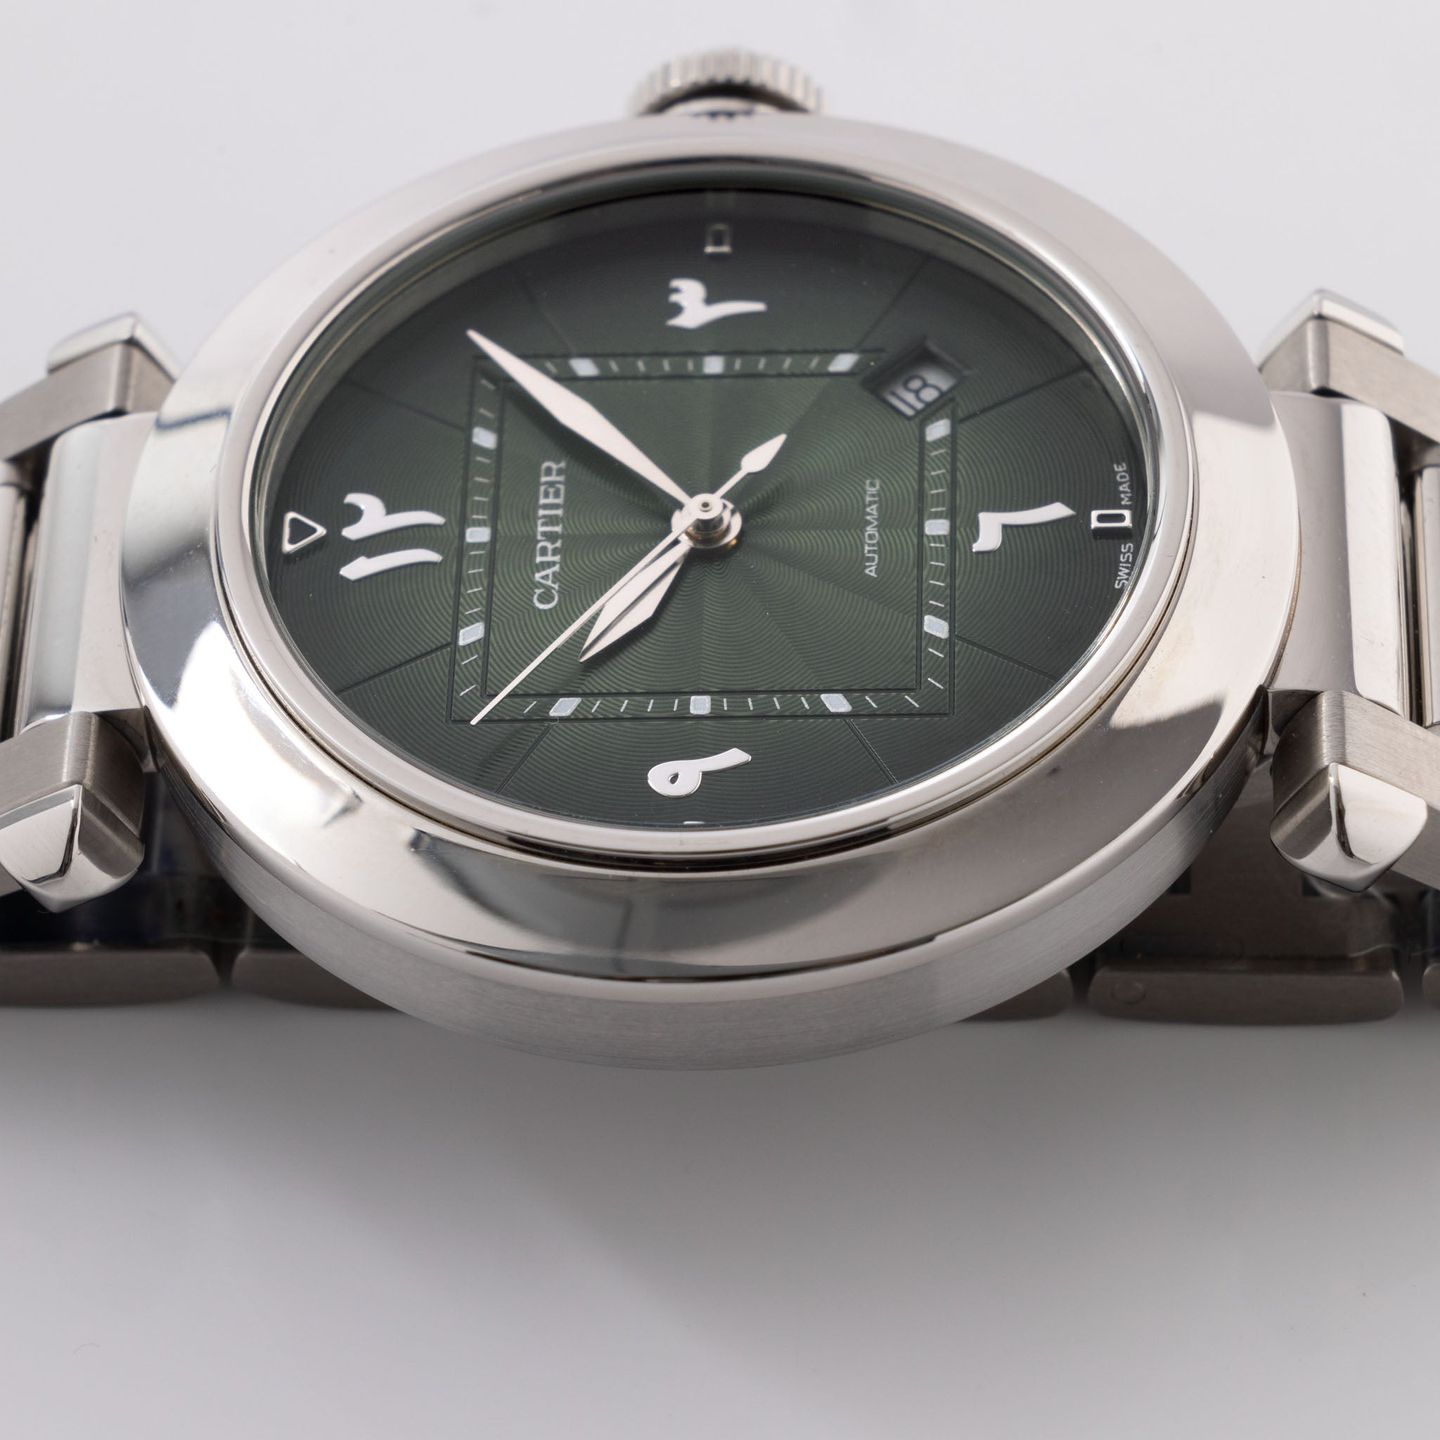 Cartier Pasha WSPA0022 (2021) - Green dial 41 mm Steel case (8/8)